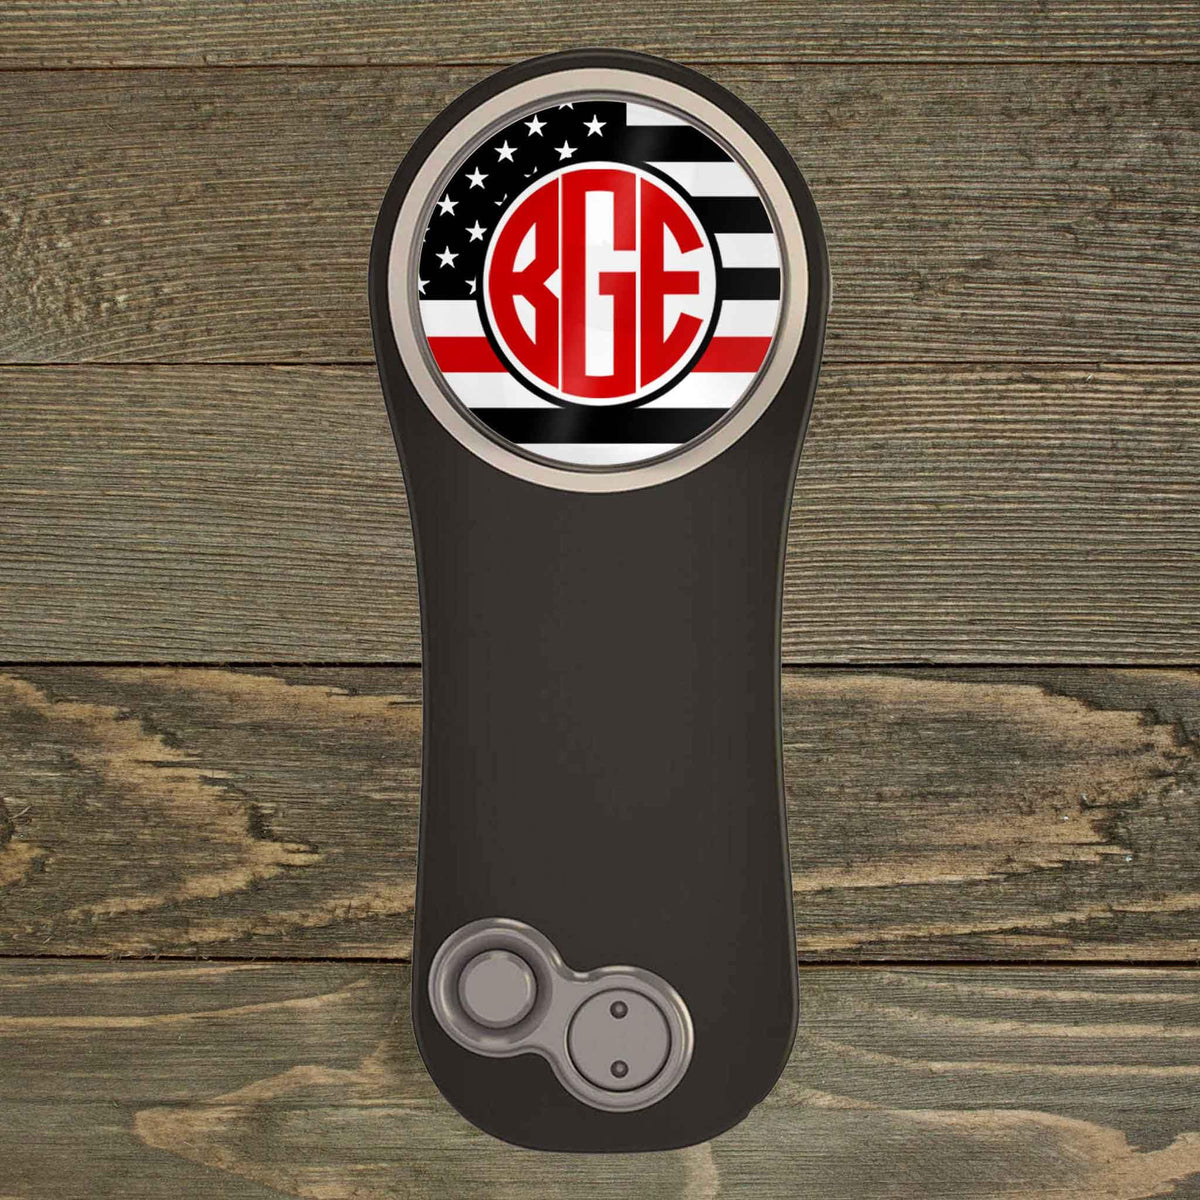 Personalized PitchFix Divot Tool | Golf Accessories | Golf Gifts | Firefighter Red Line